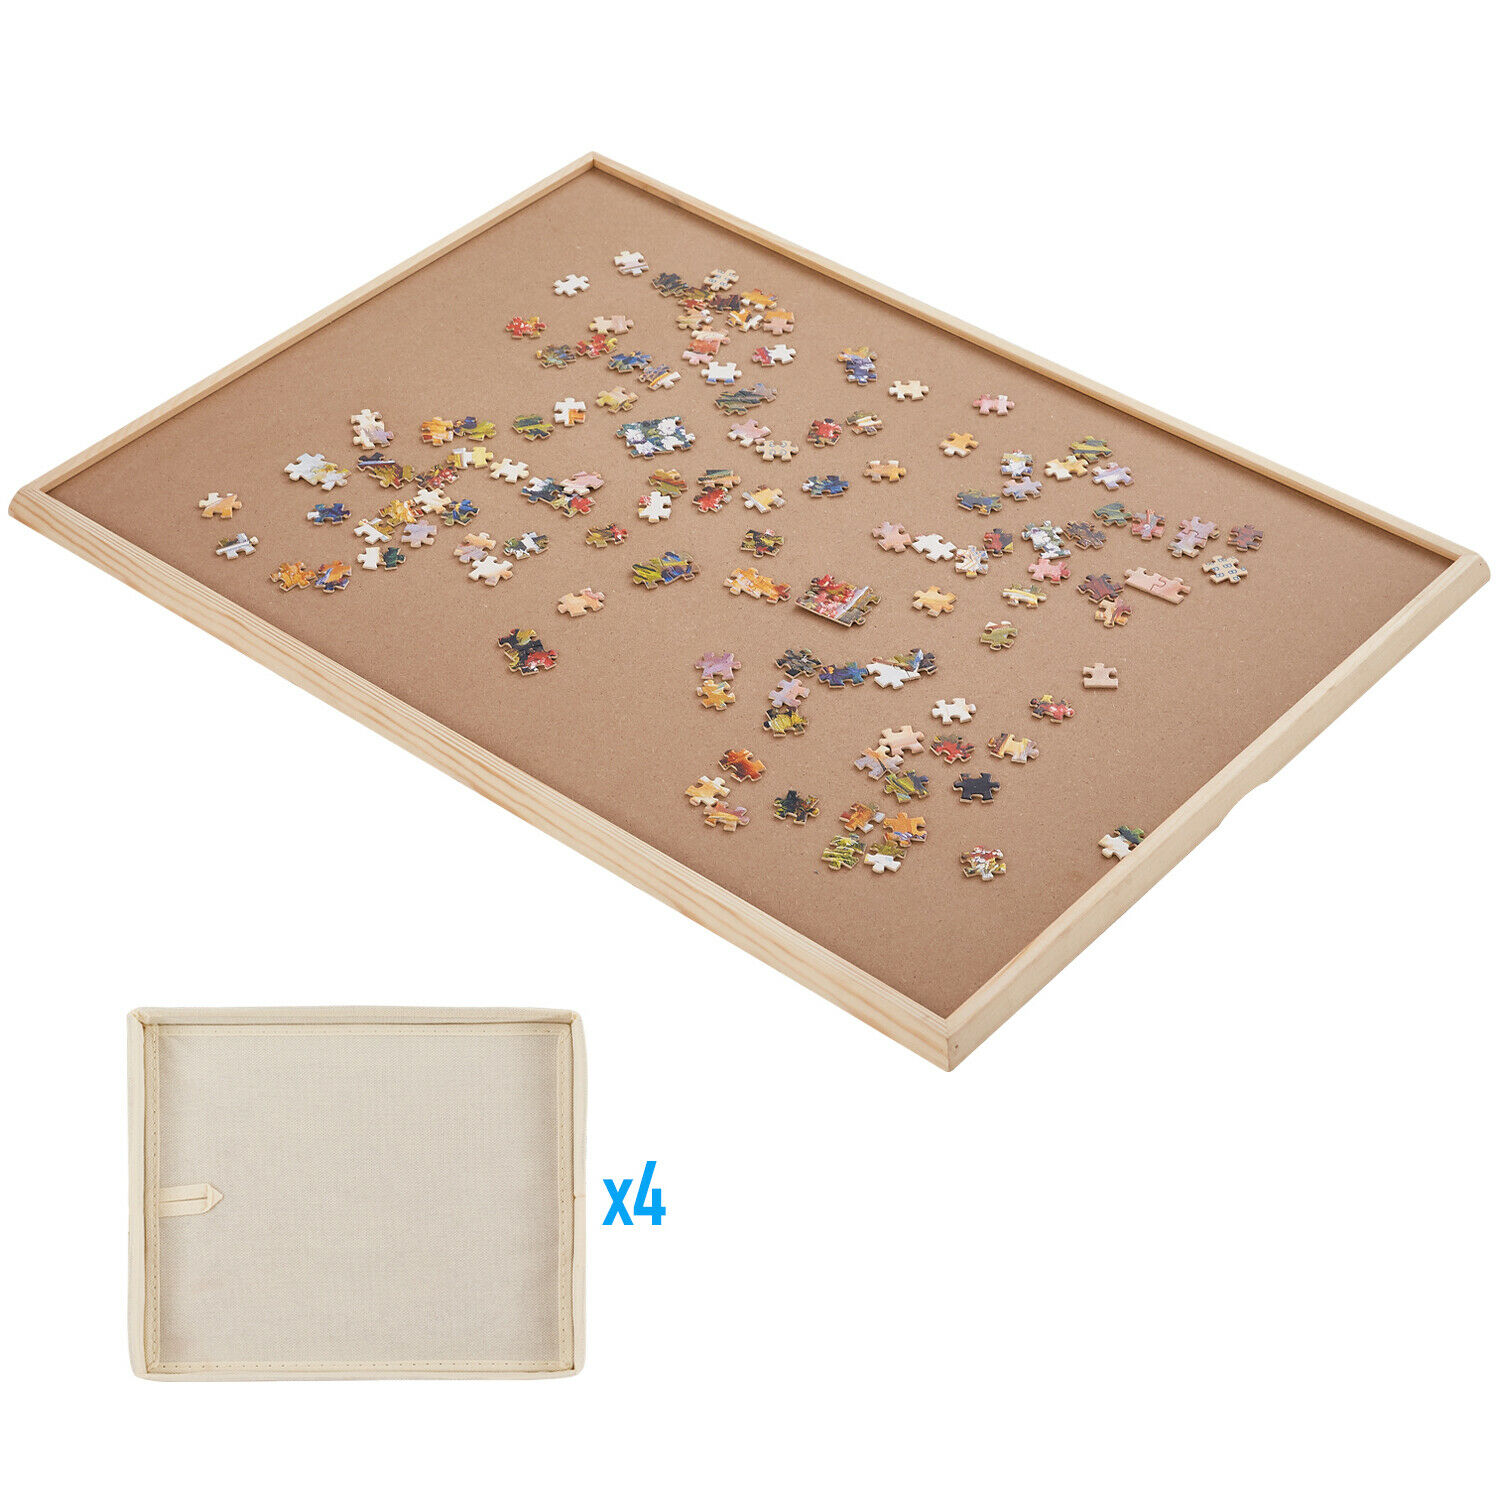 1000 Pcs Wooden Jigsaw Puzzles Board Jumbl Puzzle Education Table Birthday Gifts